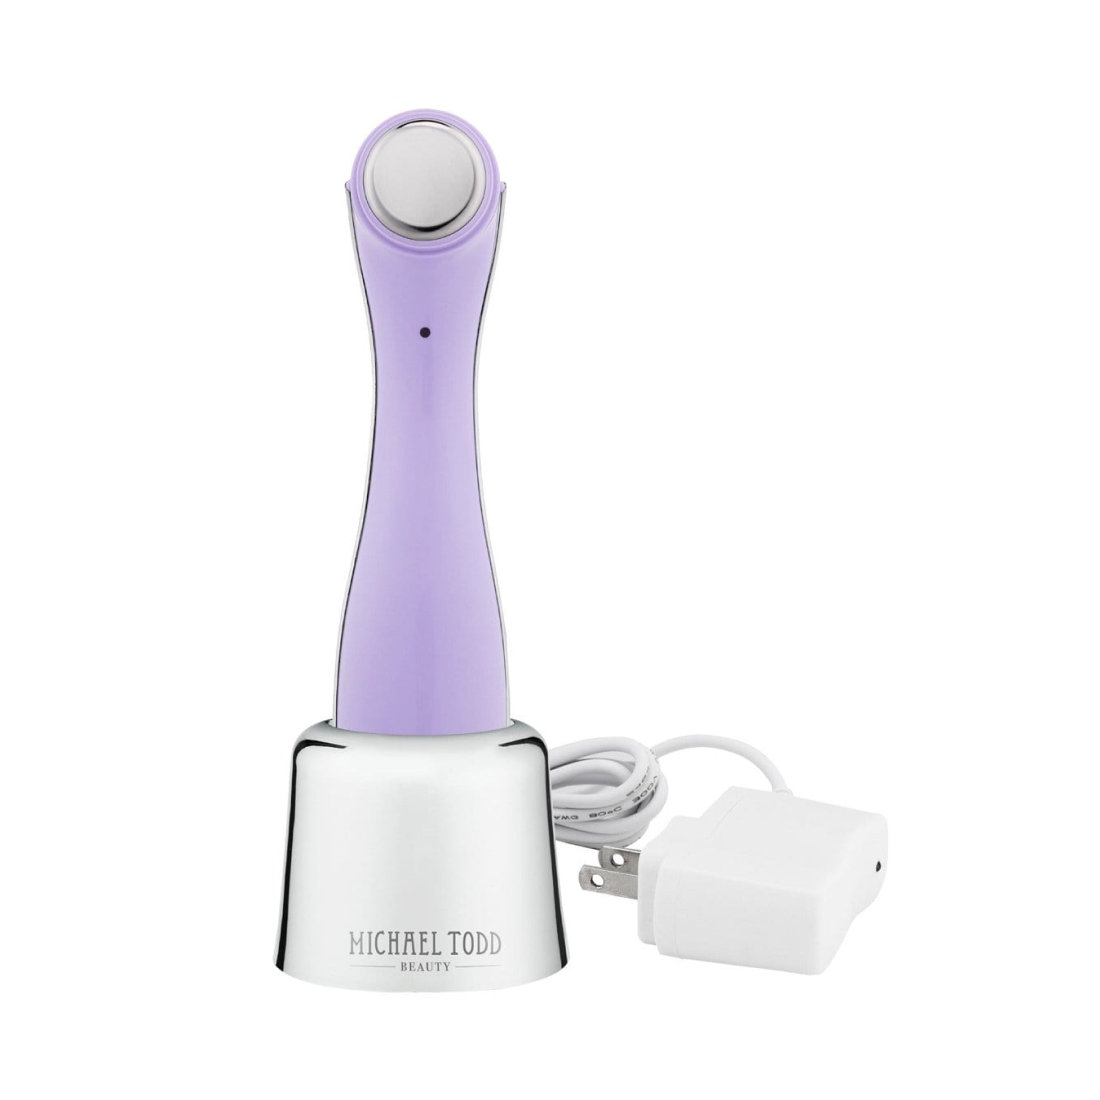 A Glow All Day device with a white cord is stylish and durable from Michael Todd Beauty.